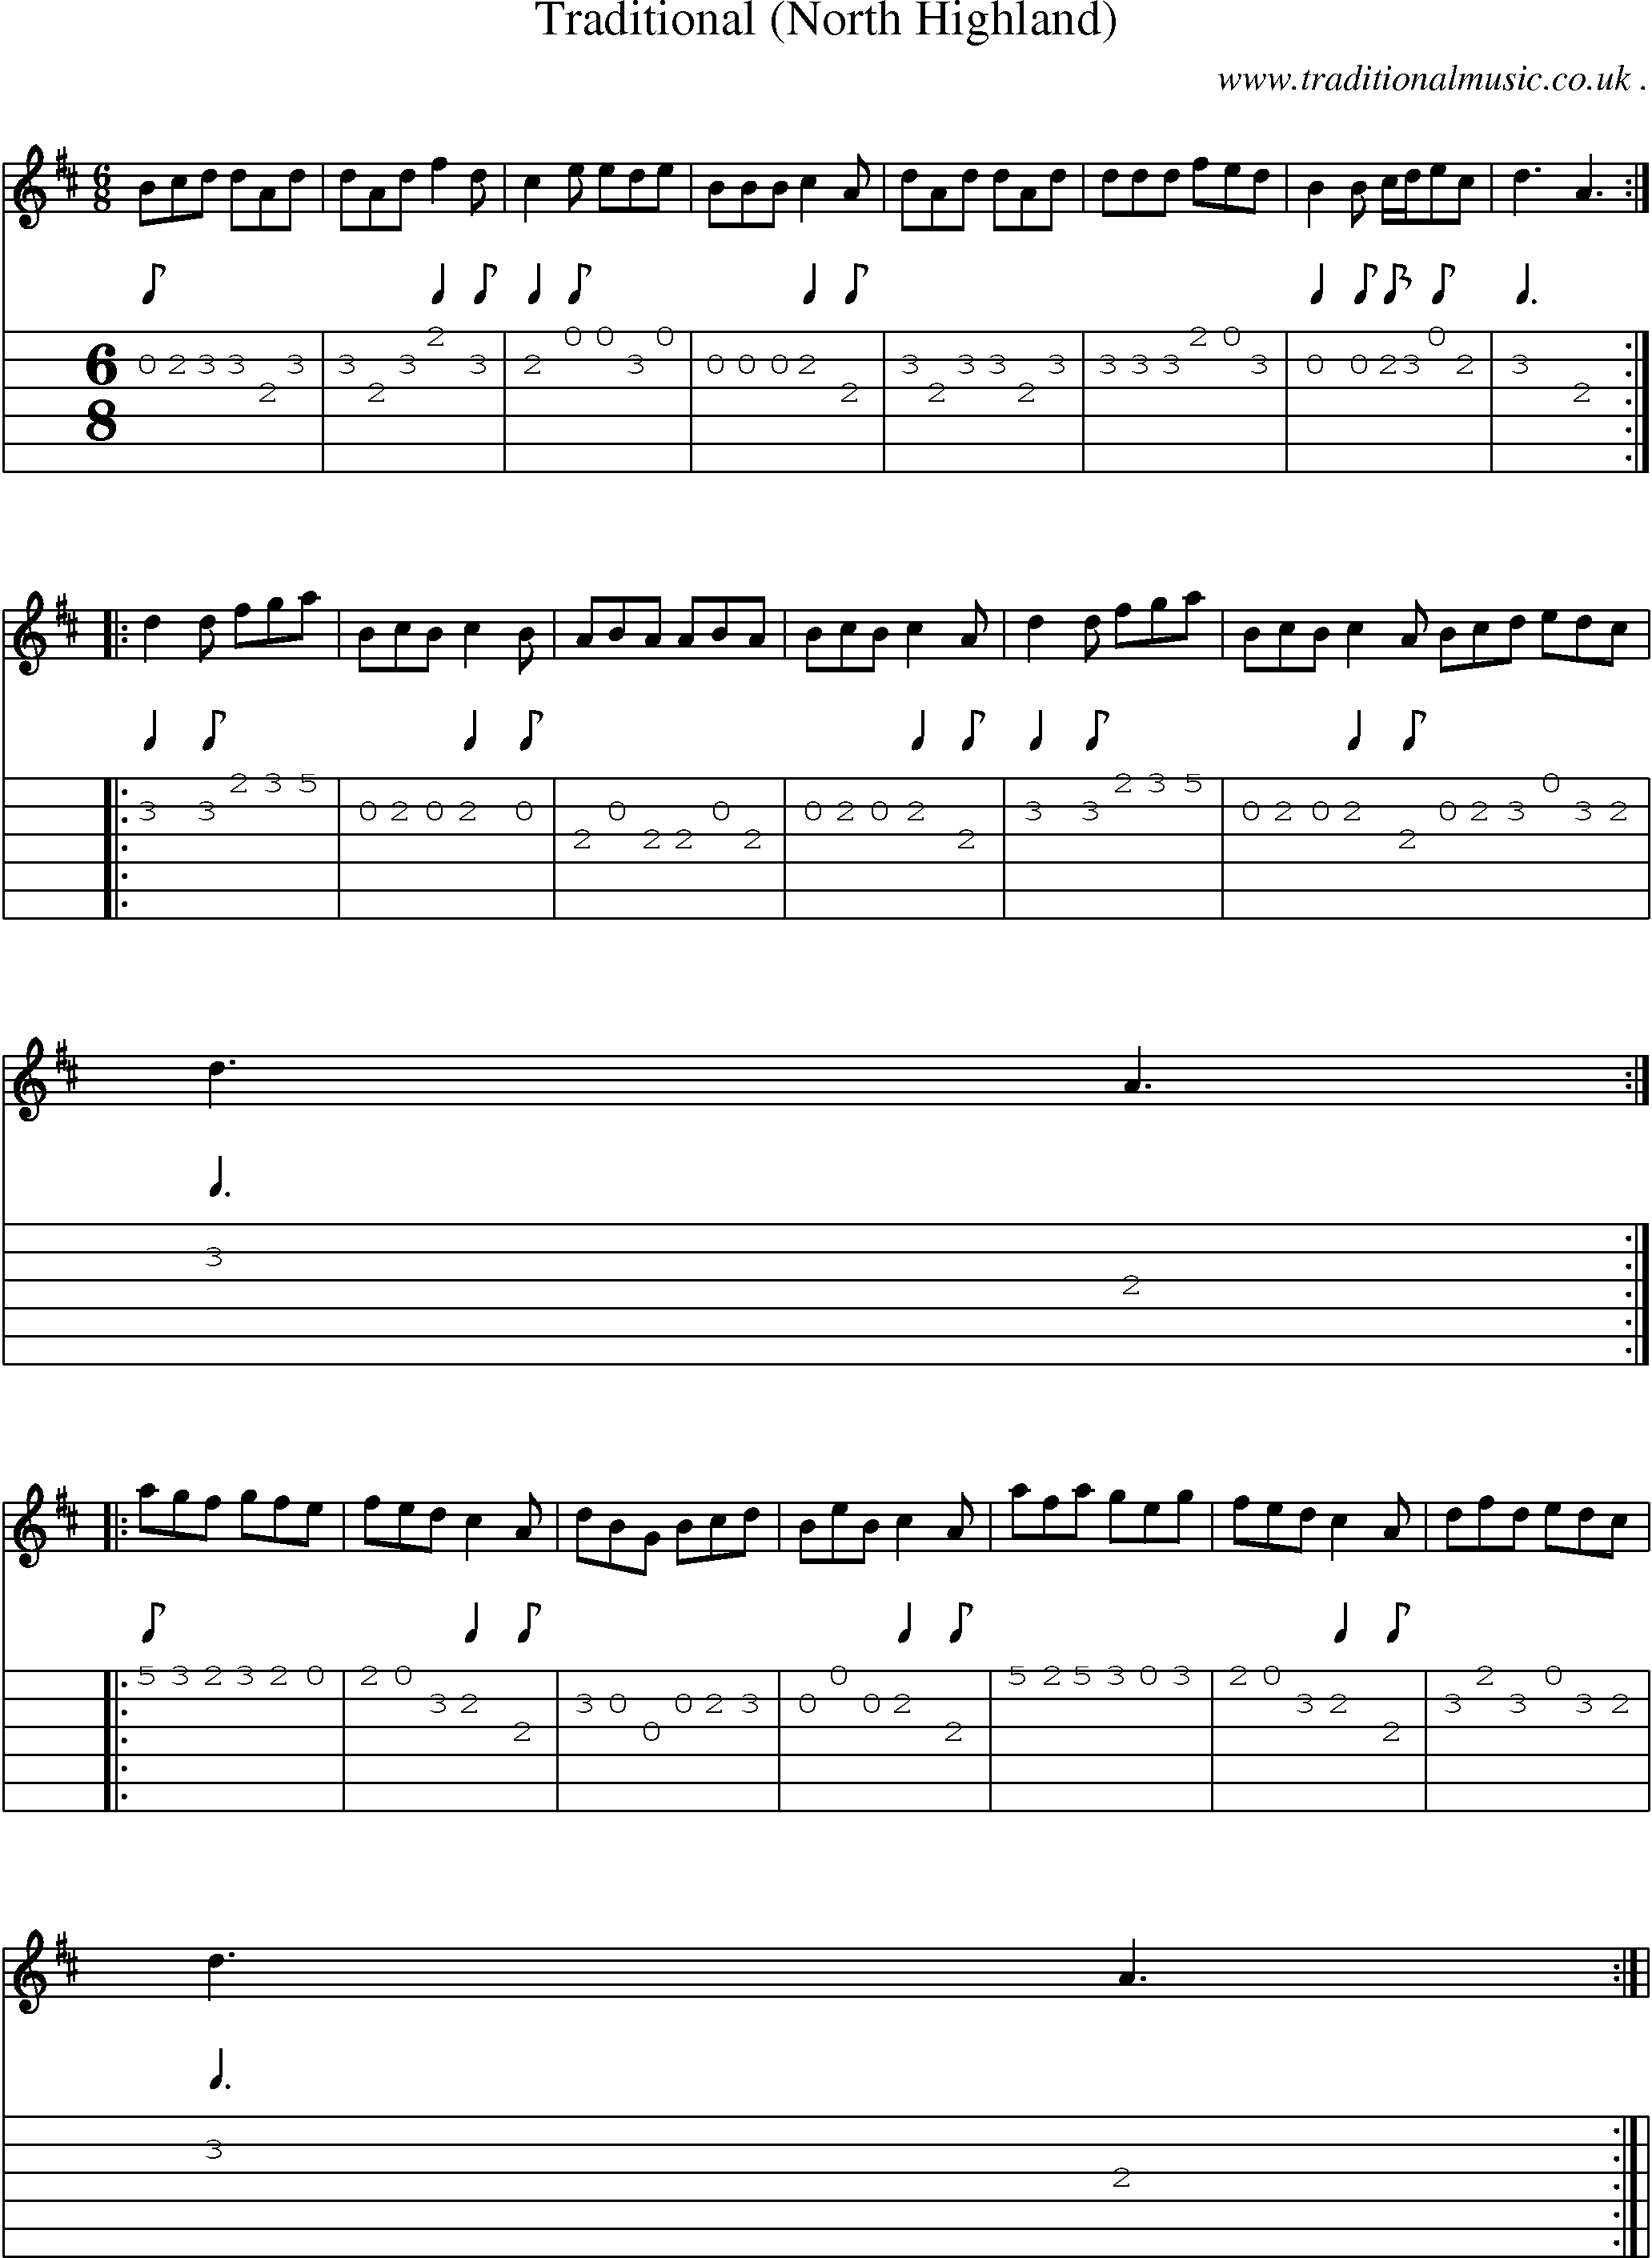 Sheet-music  score, Chords and Guitar Tabs for Traditional North Highland